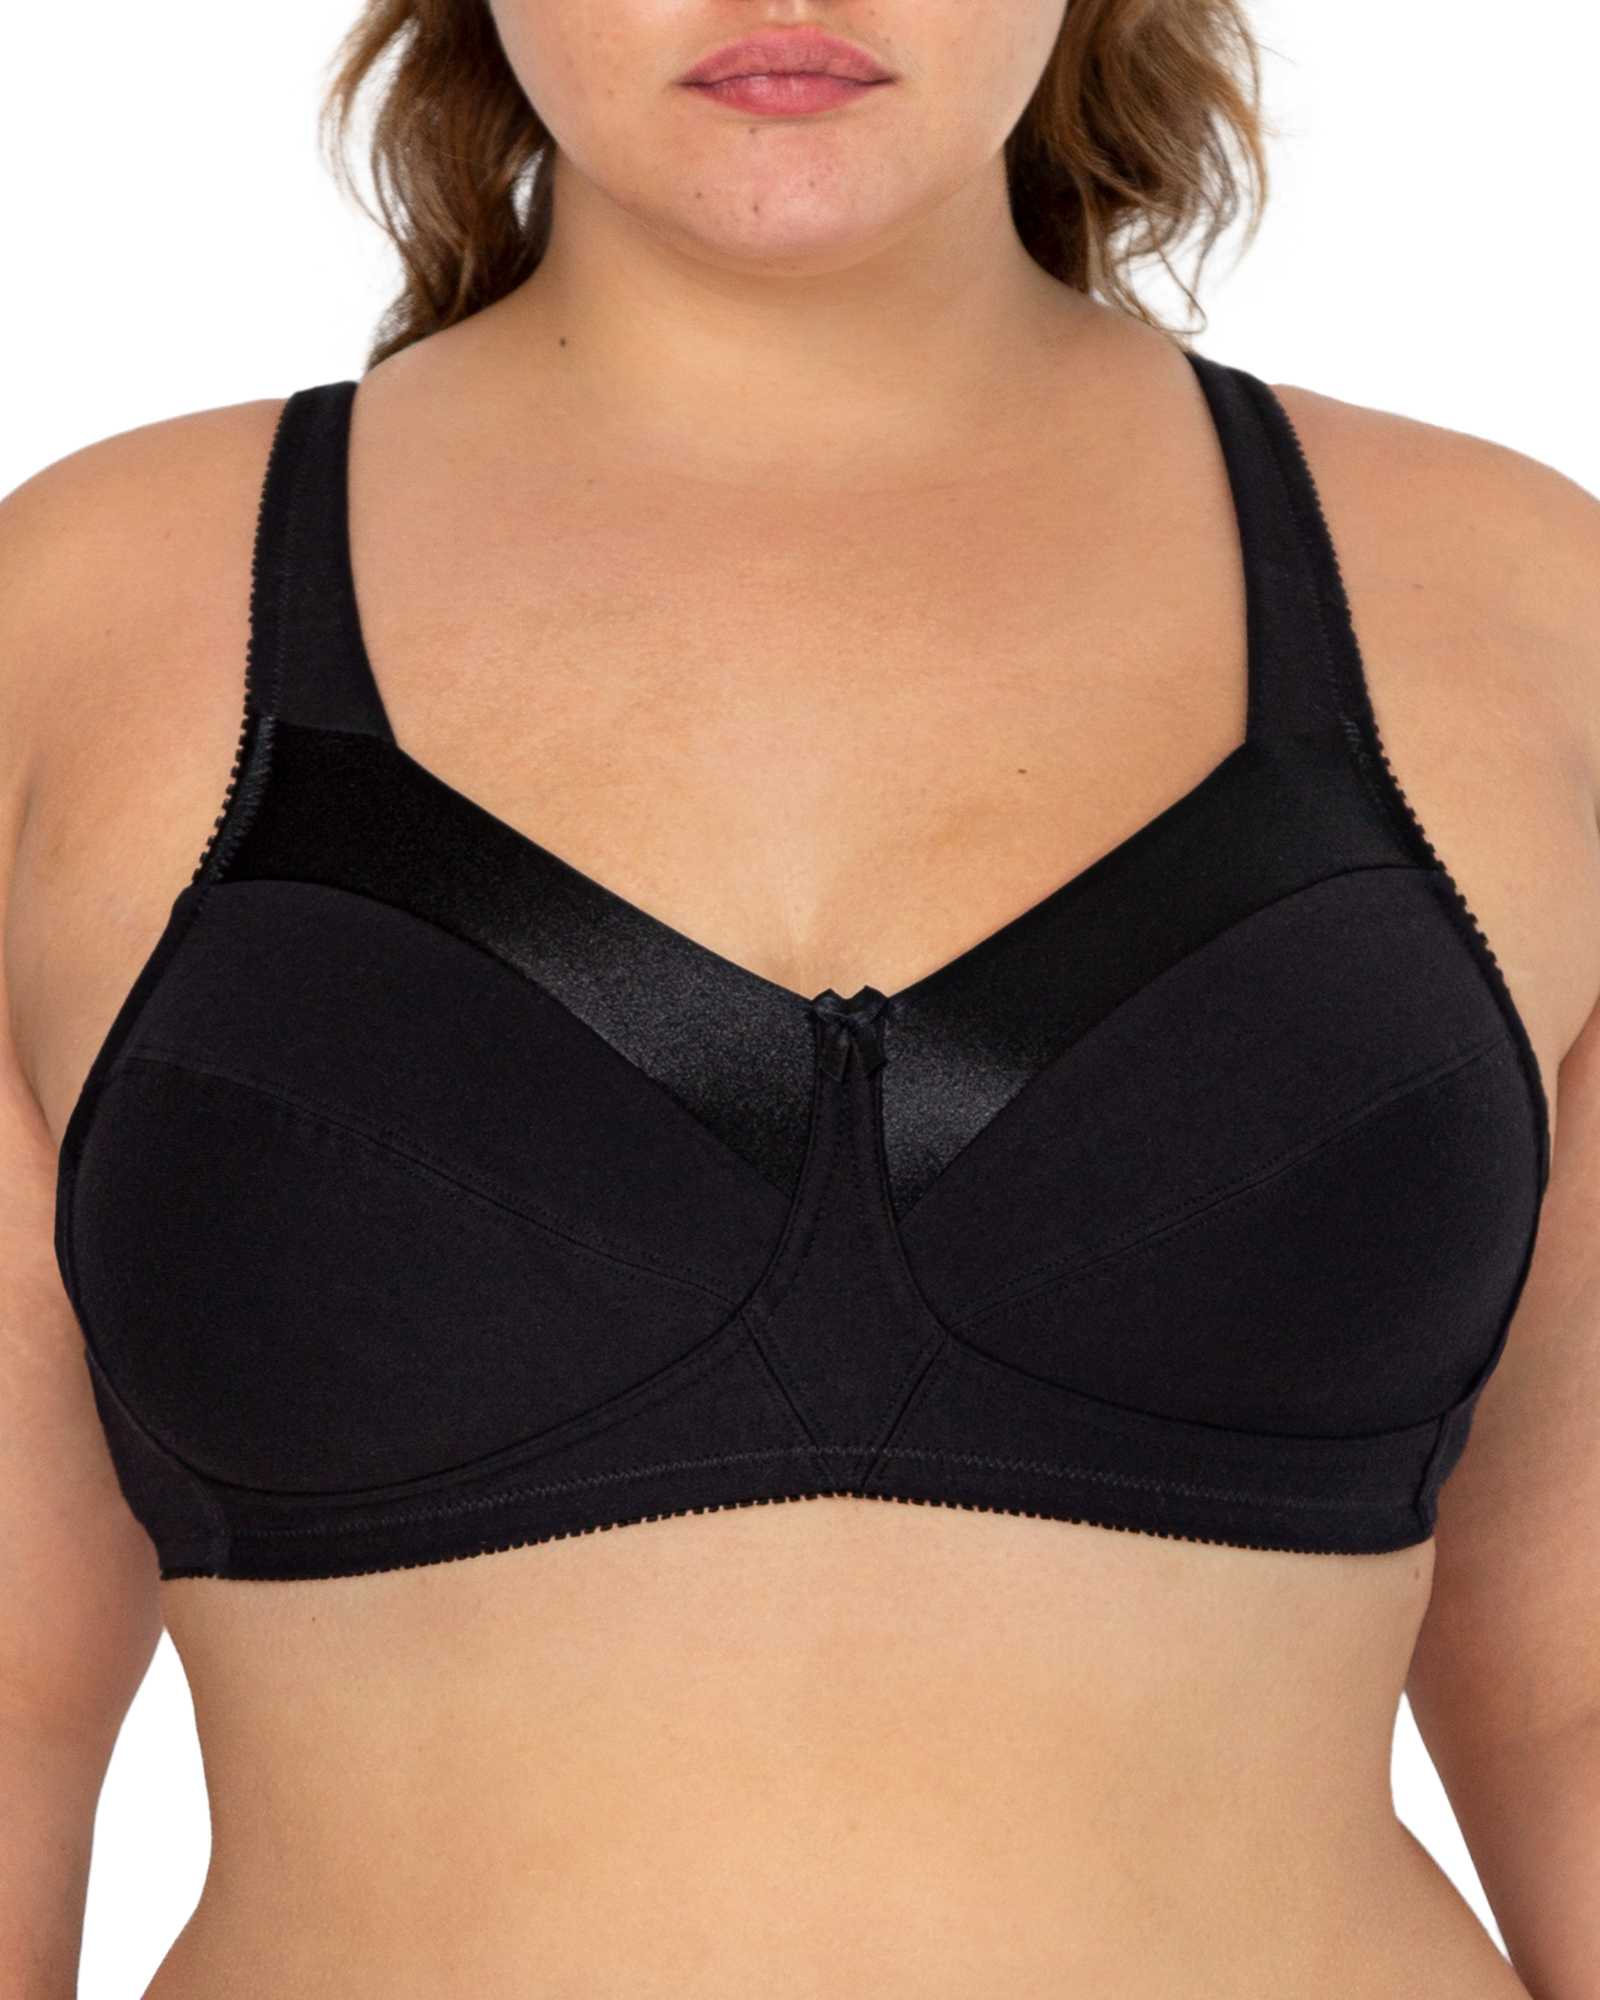  Black Fall Friday Deals Wirefree Bras for Women Full